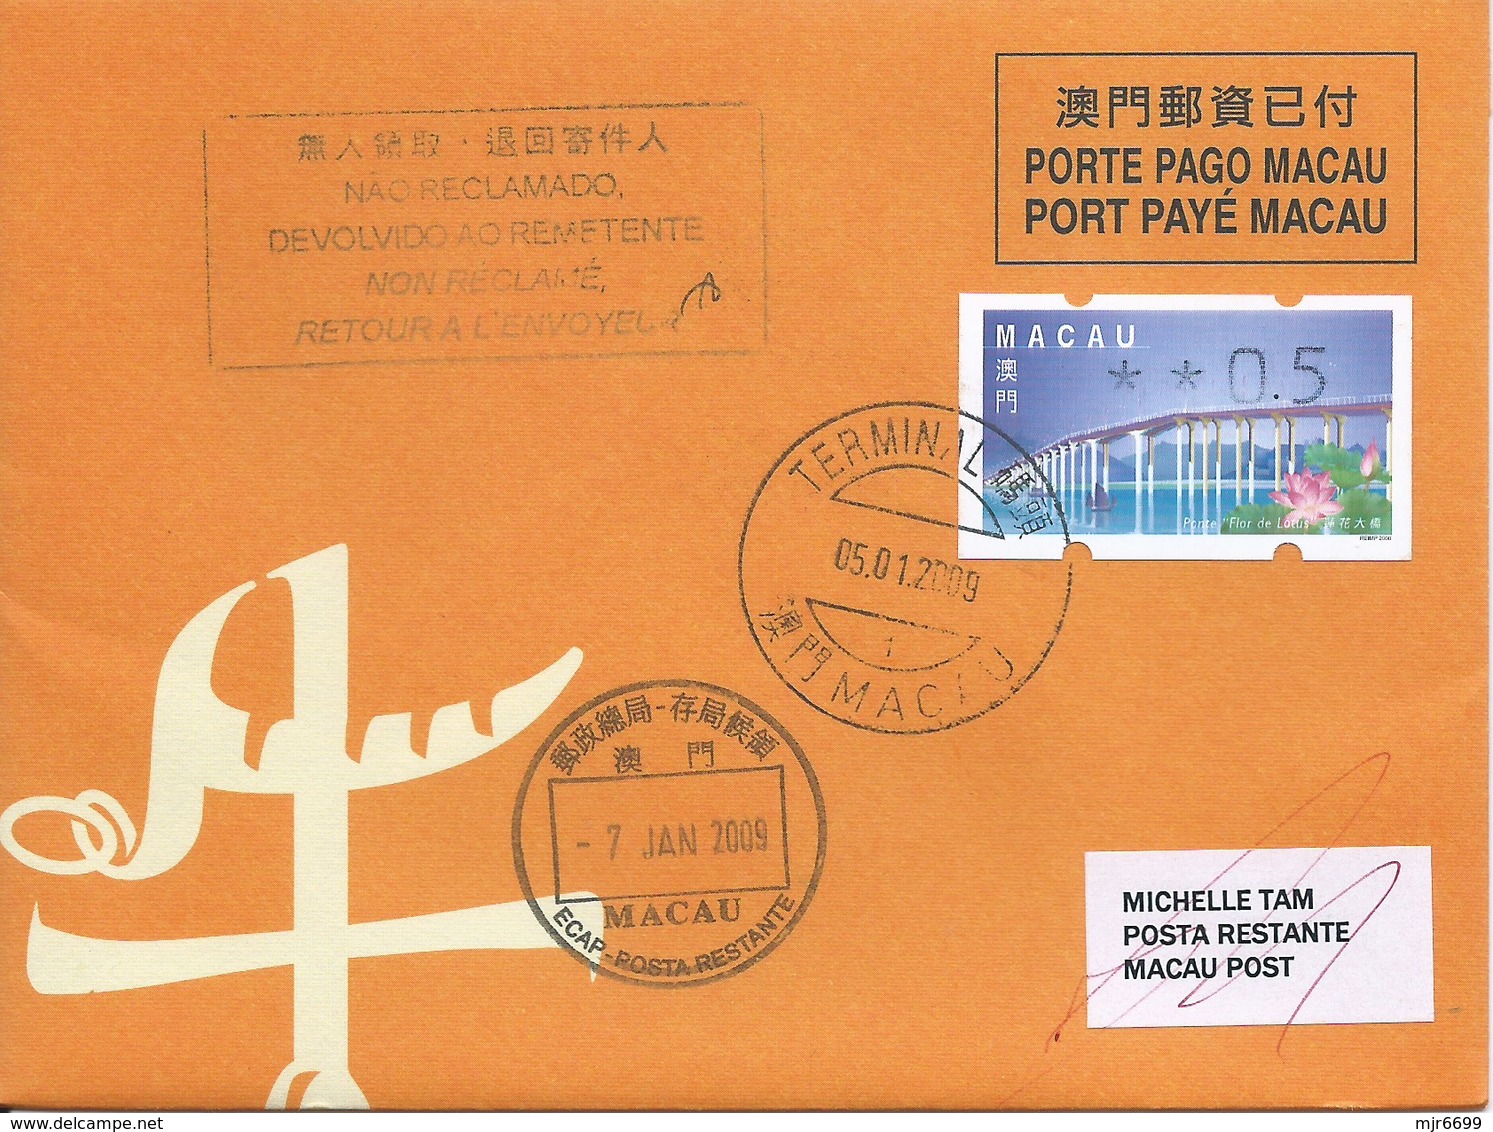 MACAU 2009 LUNAR YEAR OF THE OX GREETING CARD & POSTAGE PAID COVER FIRST DAY USAGE - Ganzsachen